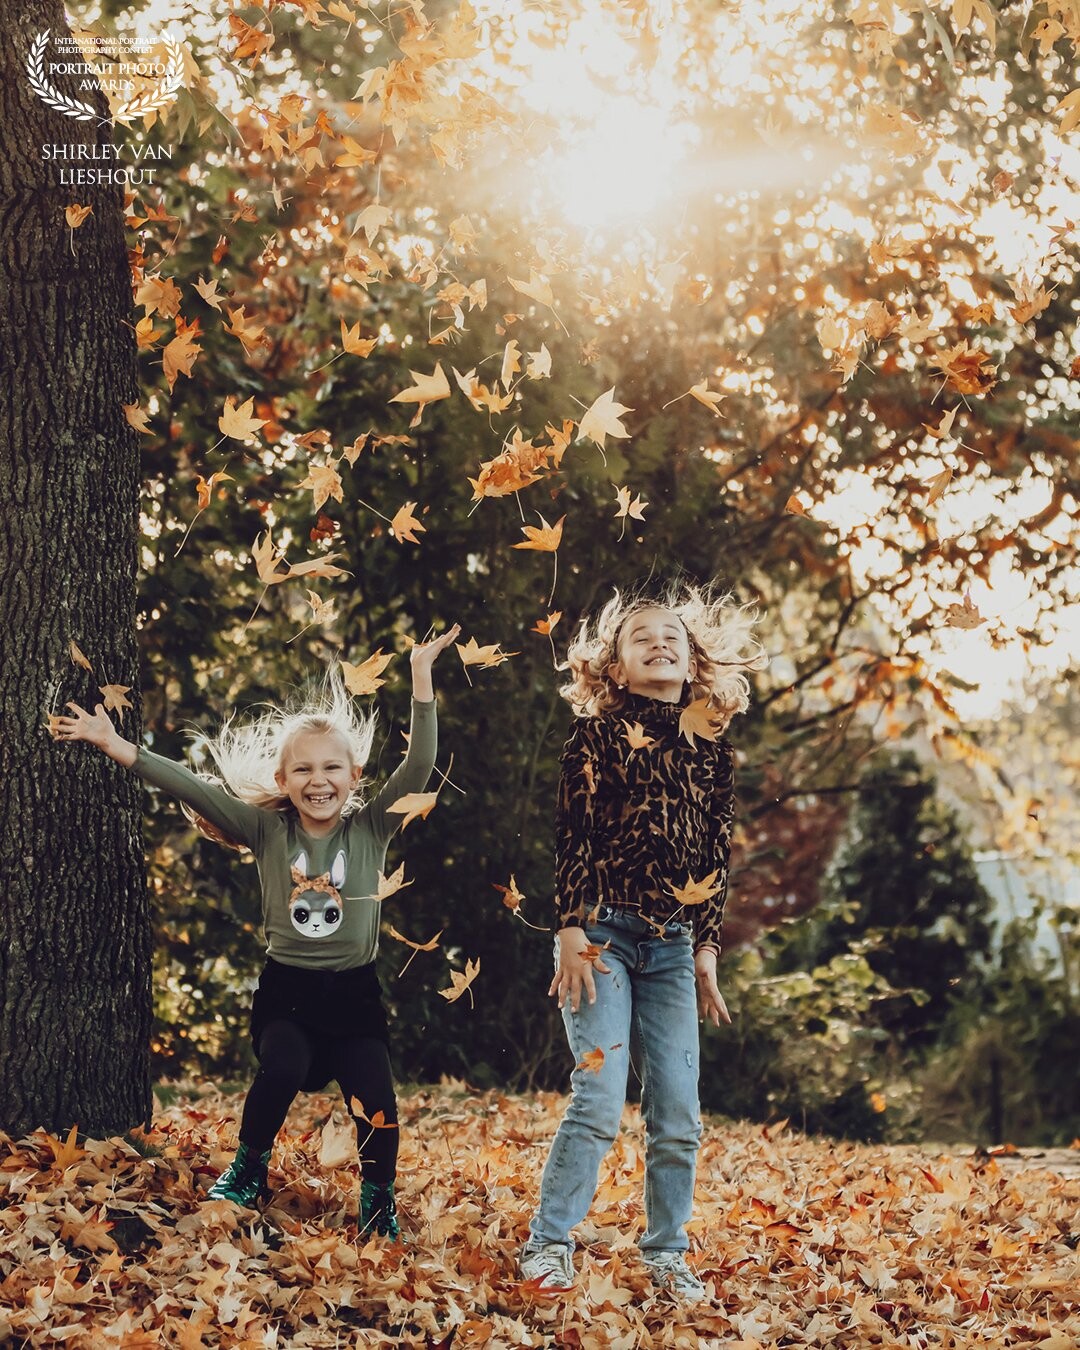 These are my daughters of 8 and 6 years old. I wanted to shoot some photos in Autumn style but in a playful and fun way. I suggested to them that they would make lots of fun and that's it! I love that I was able to catch the late afternoon sun peeking through the leaves of the tree too.